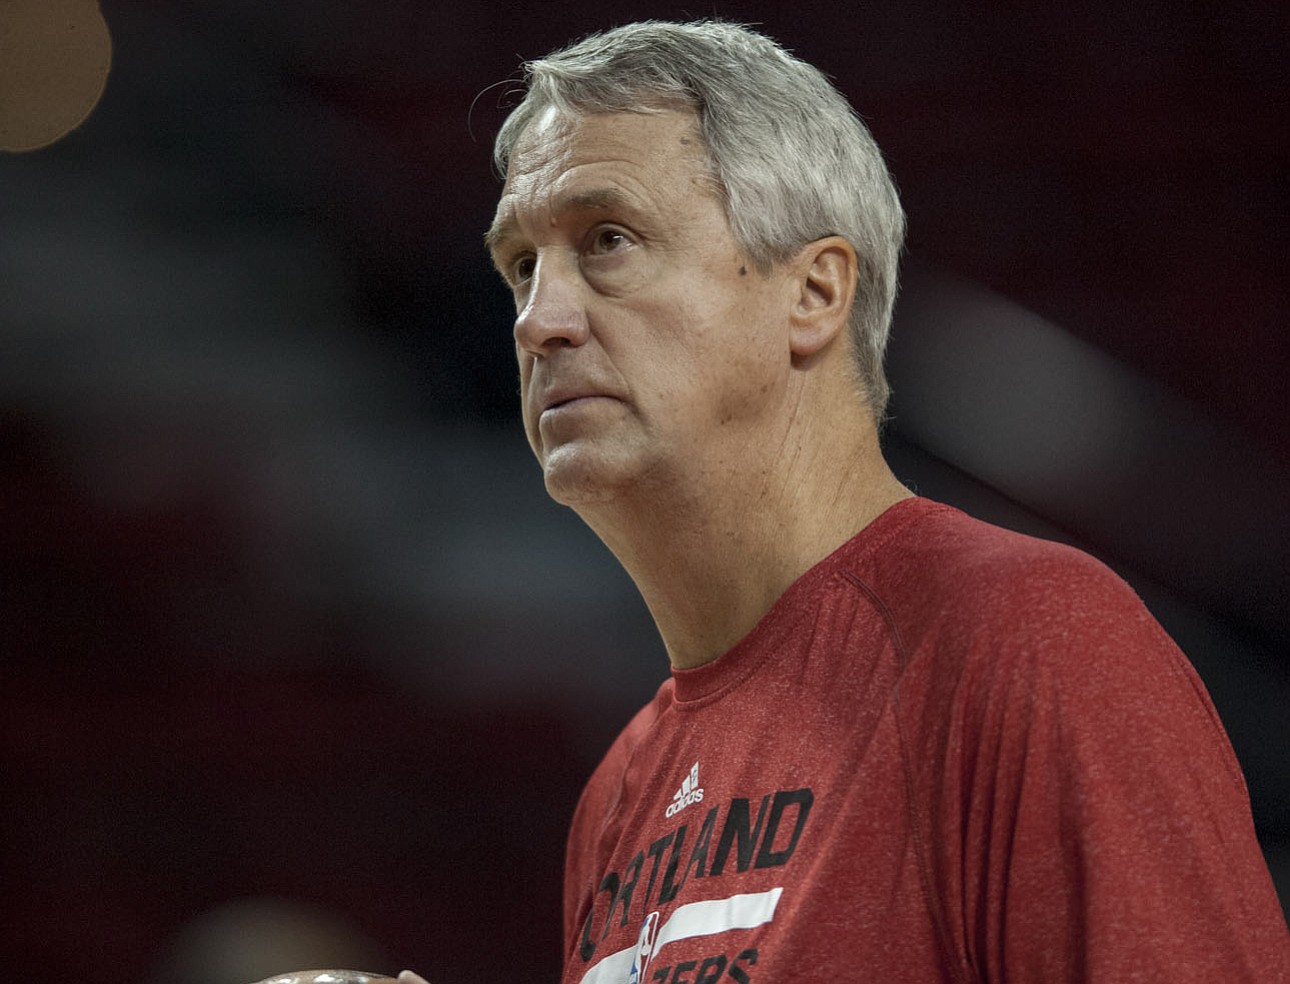 Portland Trail Blazers assistant coach Kim Hughes in action at the Moda Center in Portland Wednesday January 14, 2015.